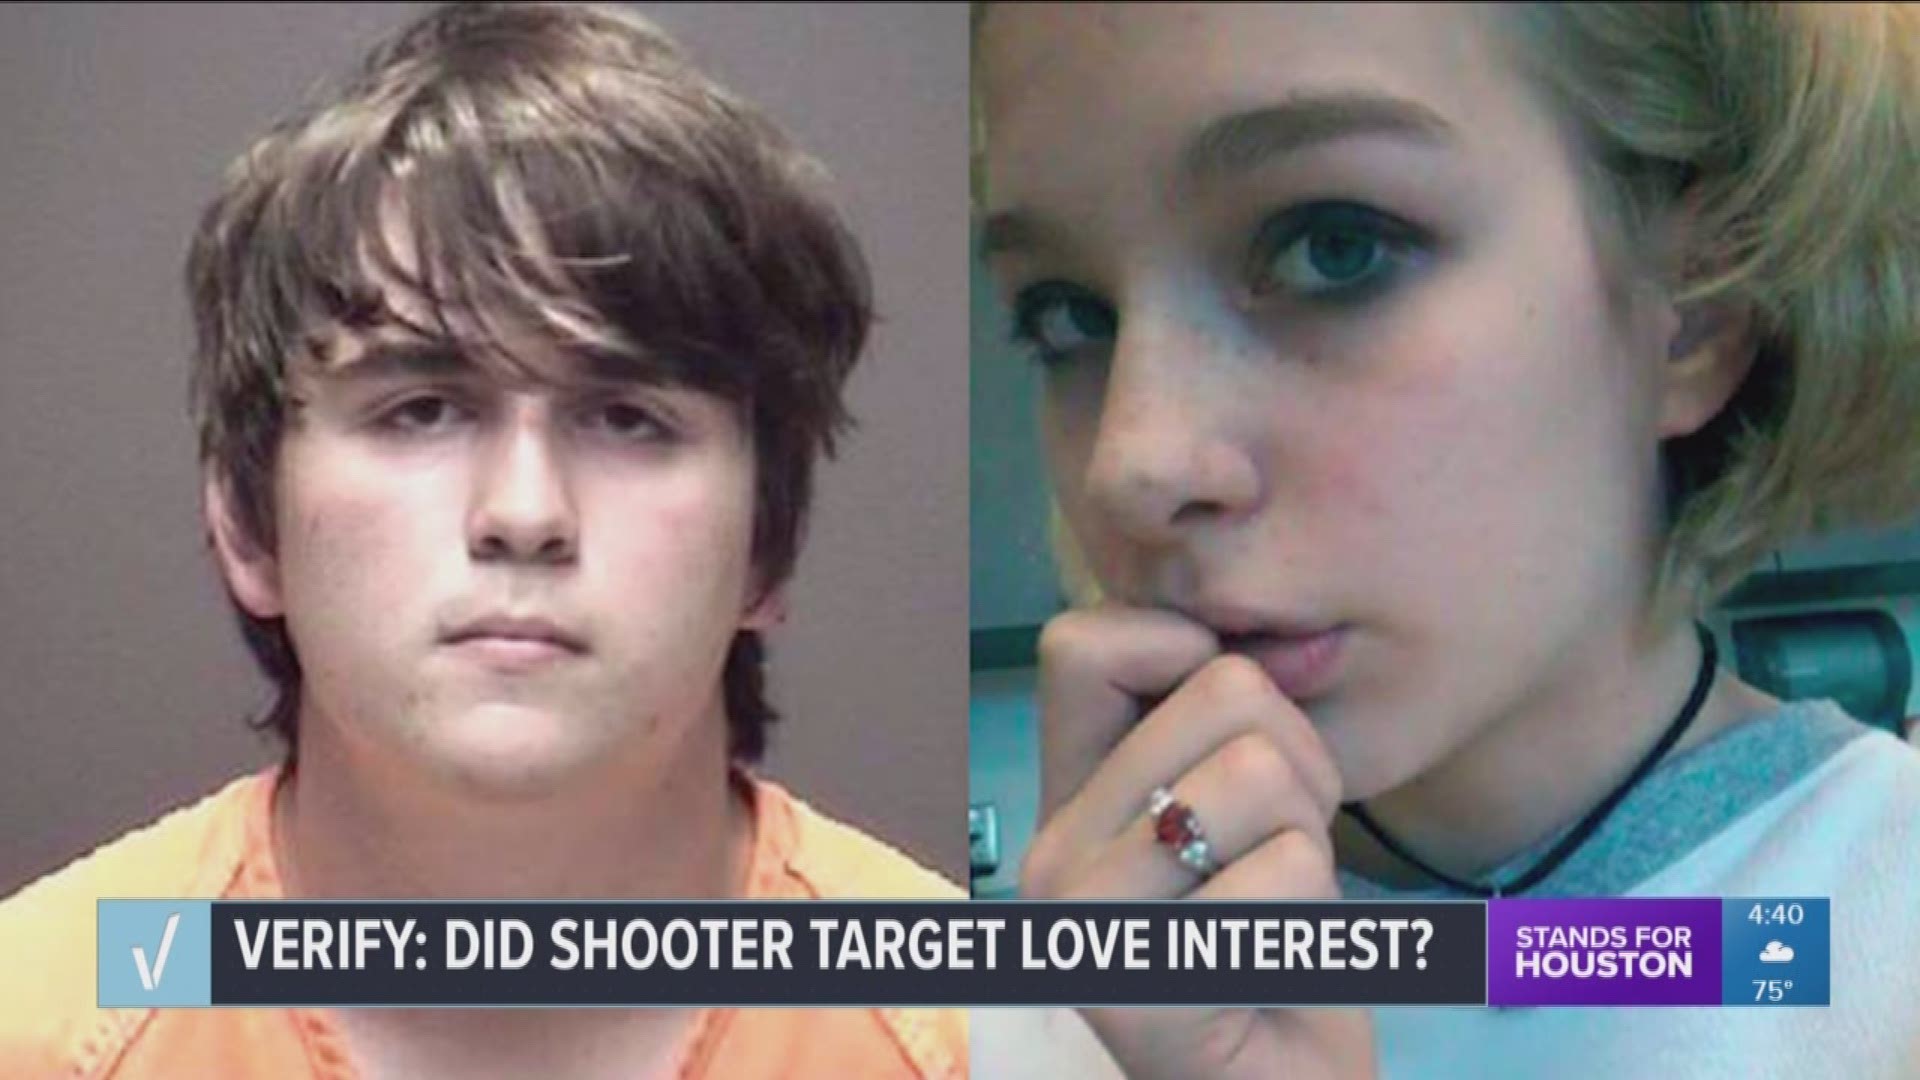 KHOU 11 reporter Marcelino Benito is looking into claims that the Santa Fe High School shooting suspect targeted a love interest.